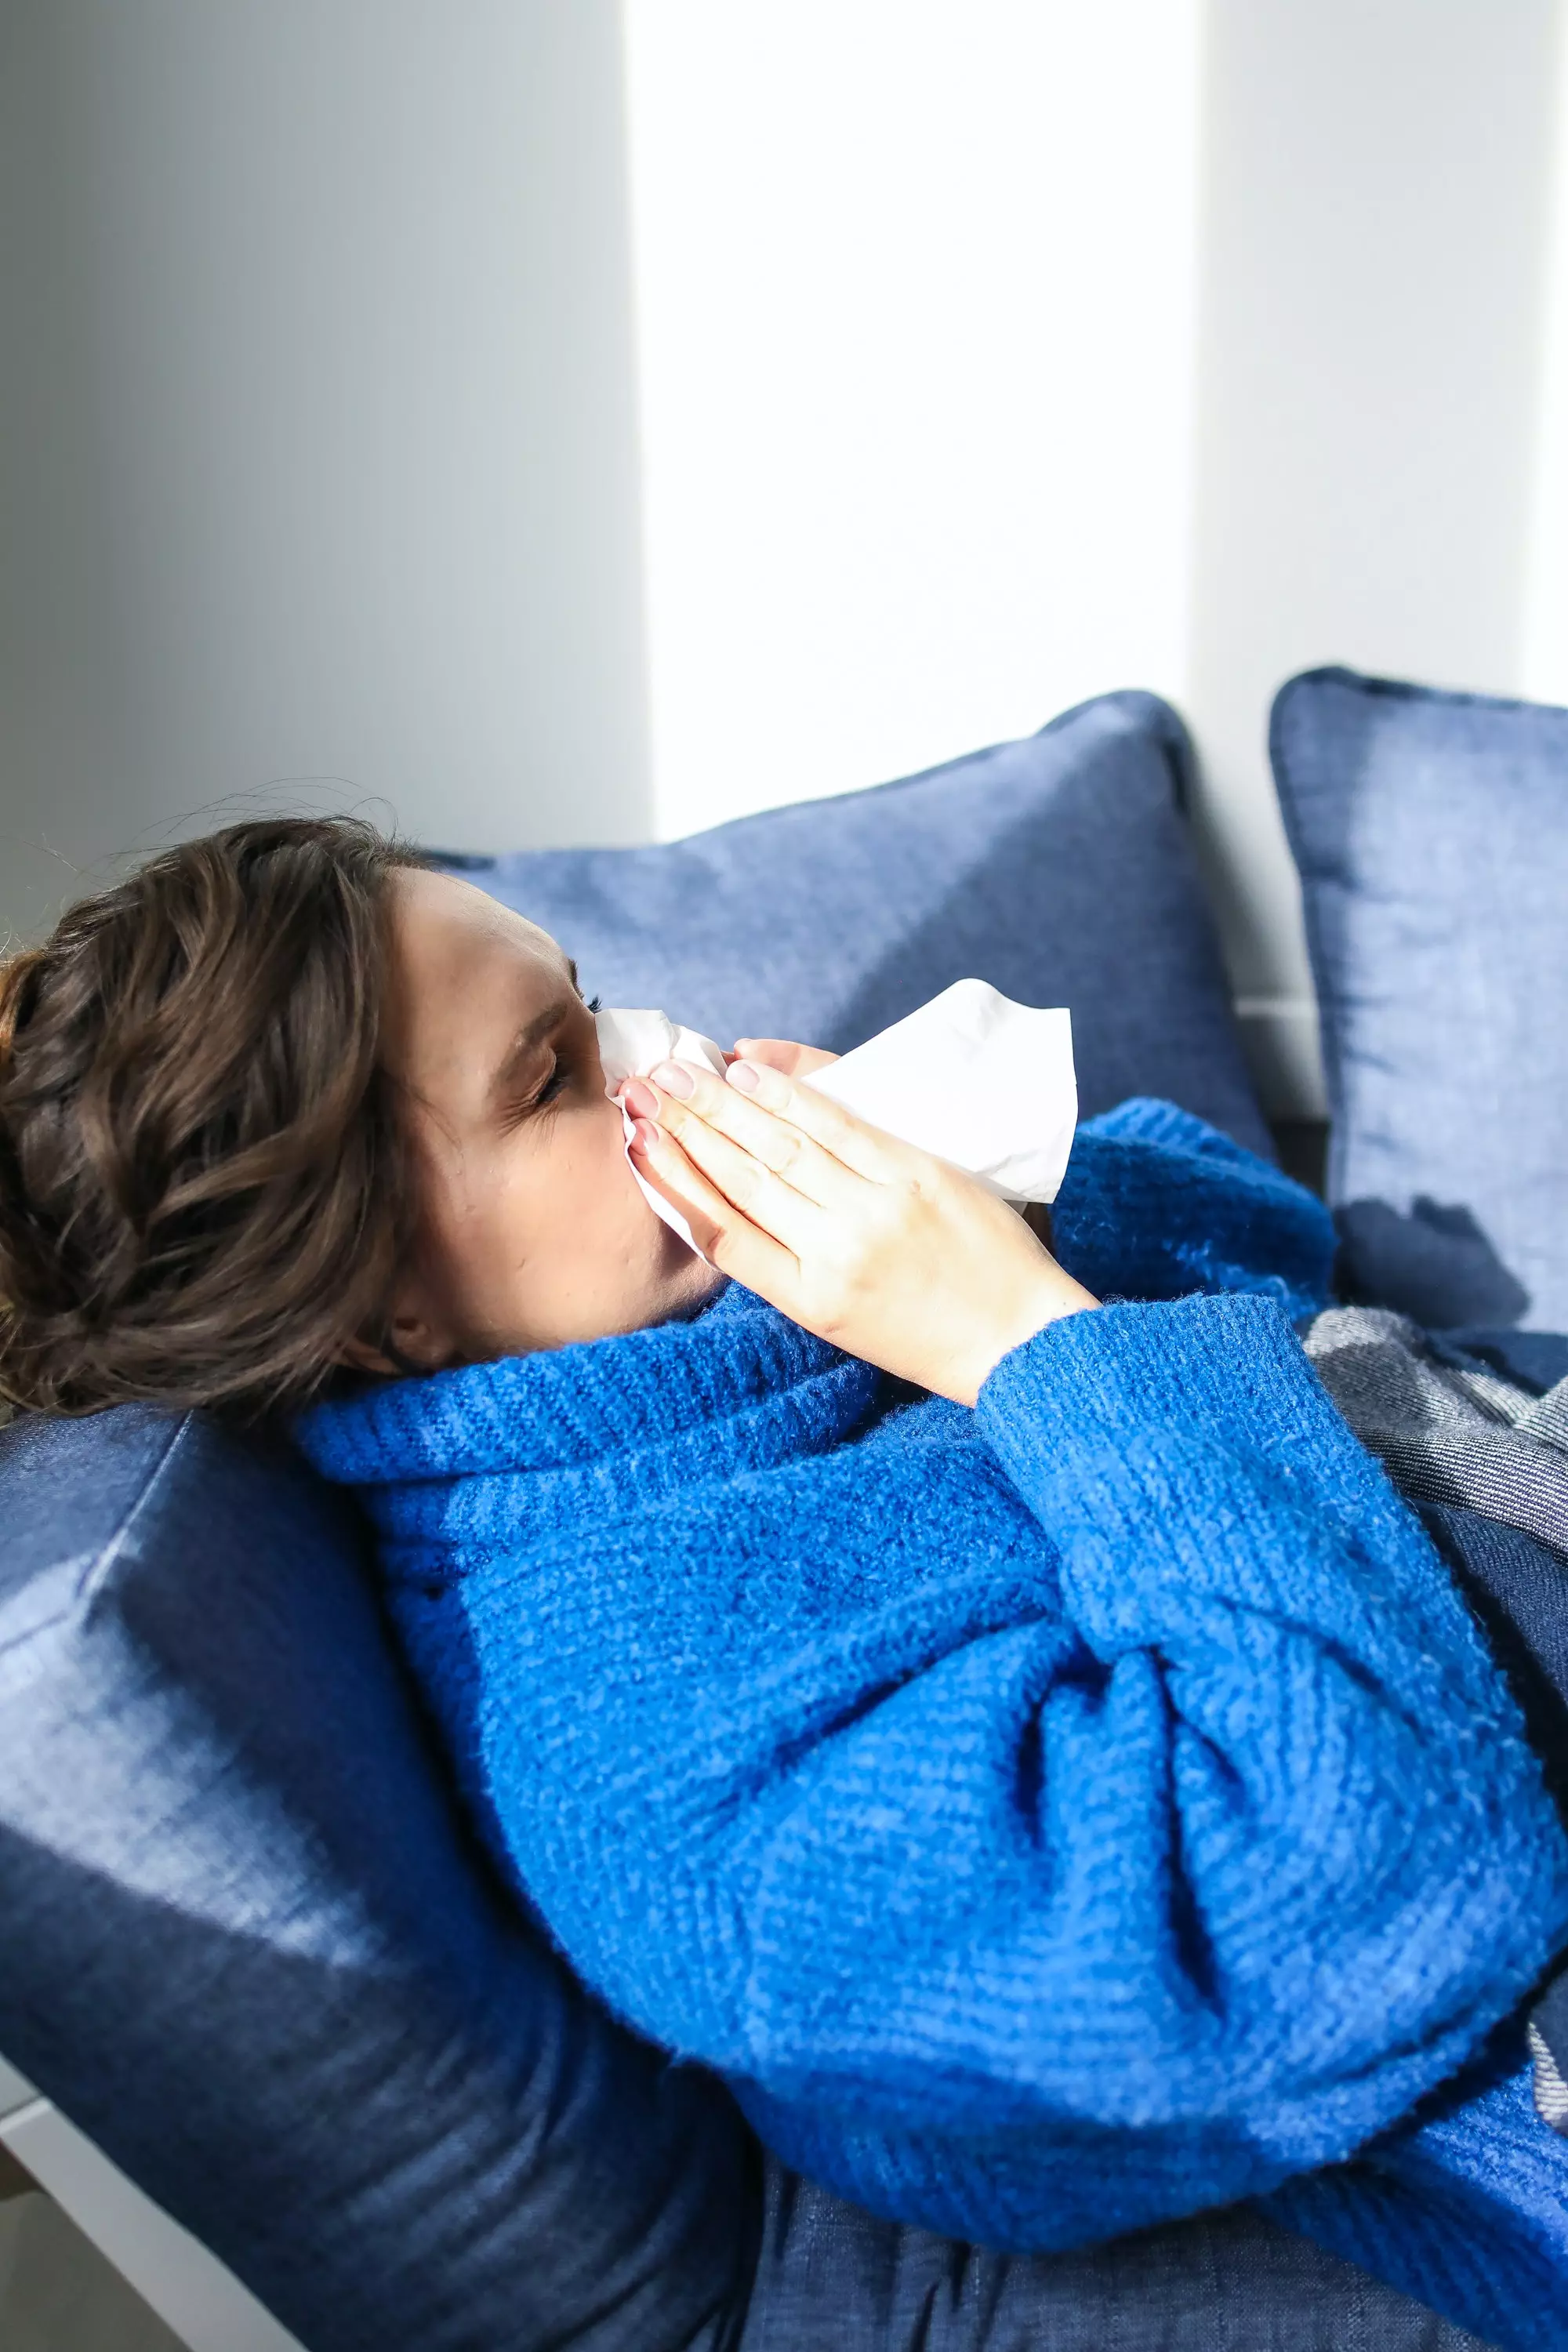 New Covid symptoms may appear more like a mild cold (